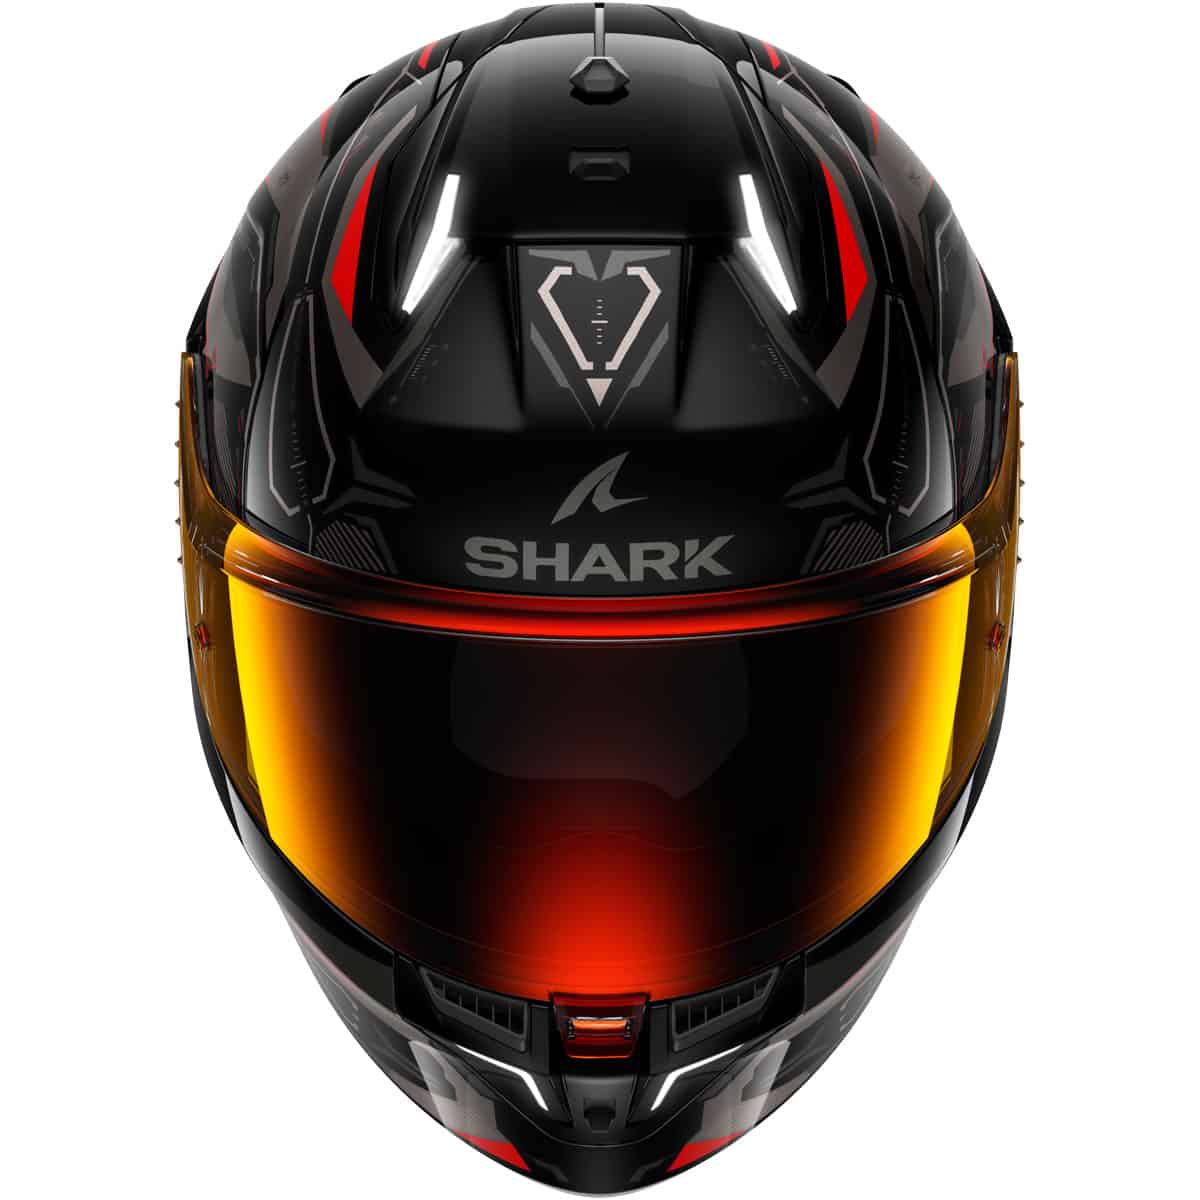 The Shark Skwal i3 helmet provides exceptional comfort, including features such as a Pinlock-equipped visor and adjustable interior settings, perfect for glasses wearers. 